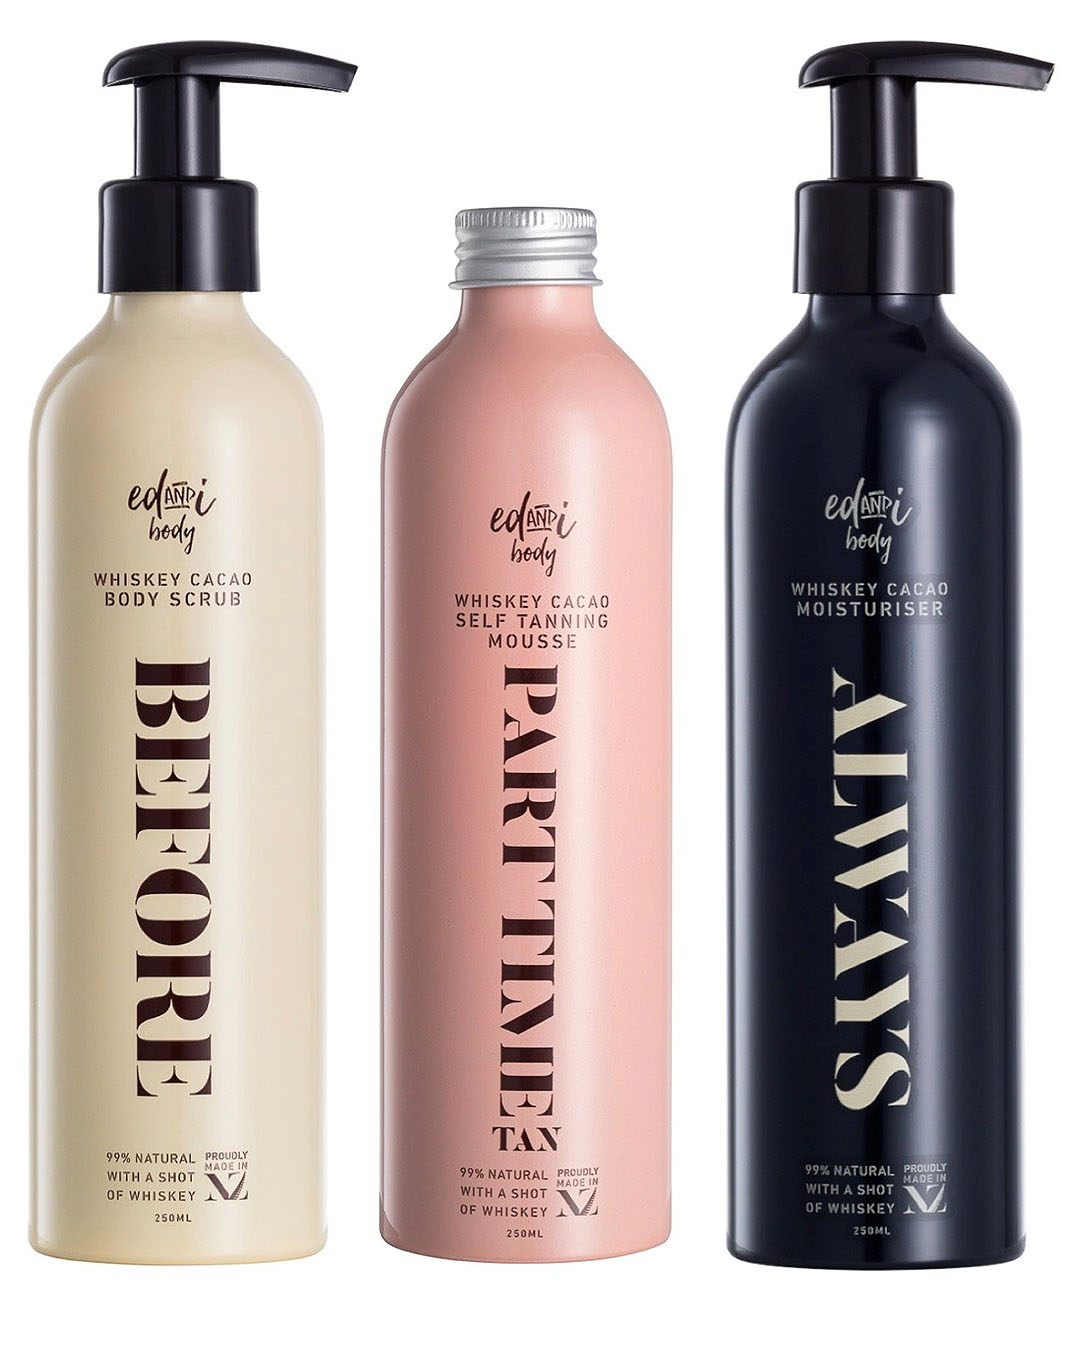 Three bottles of tan mousse - one for each step of the tanning process.